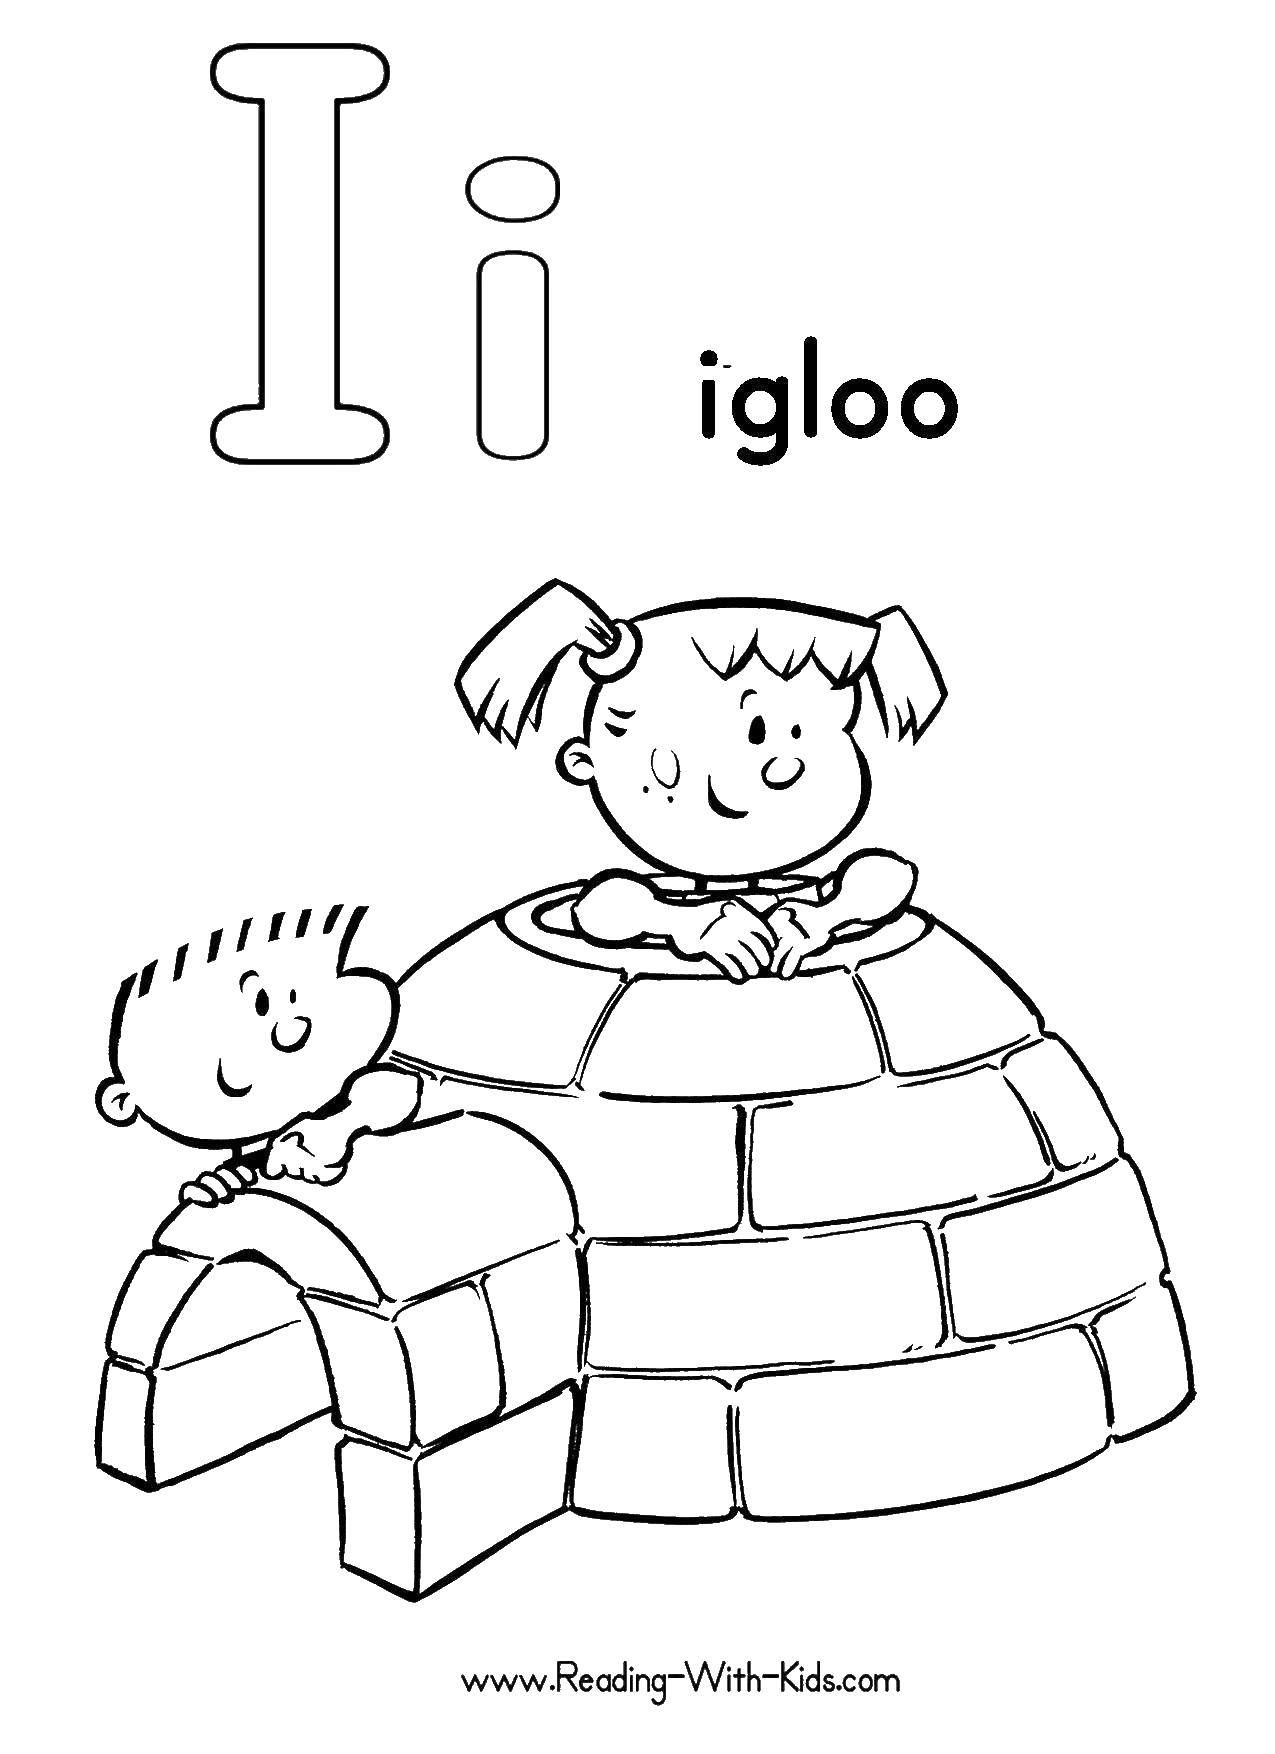 Coloring House of the Eskimos. Category Coloring pages for kids. Tags:  house, Eskimos, Igloo, kids.